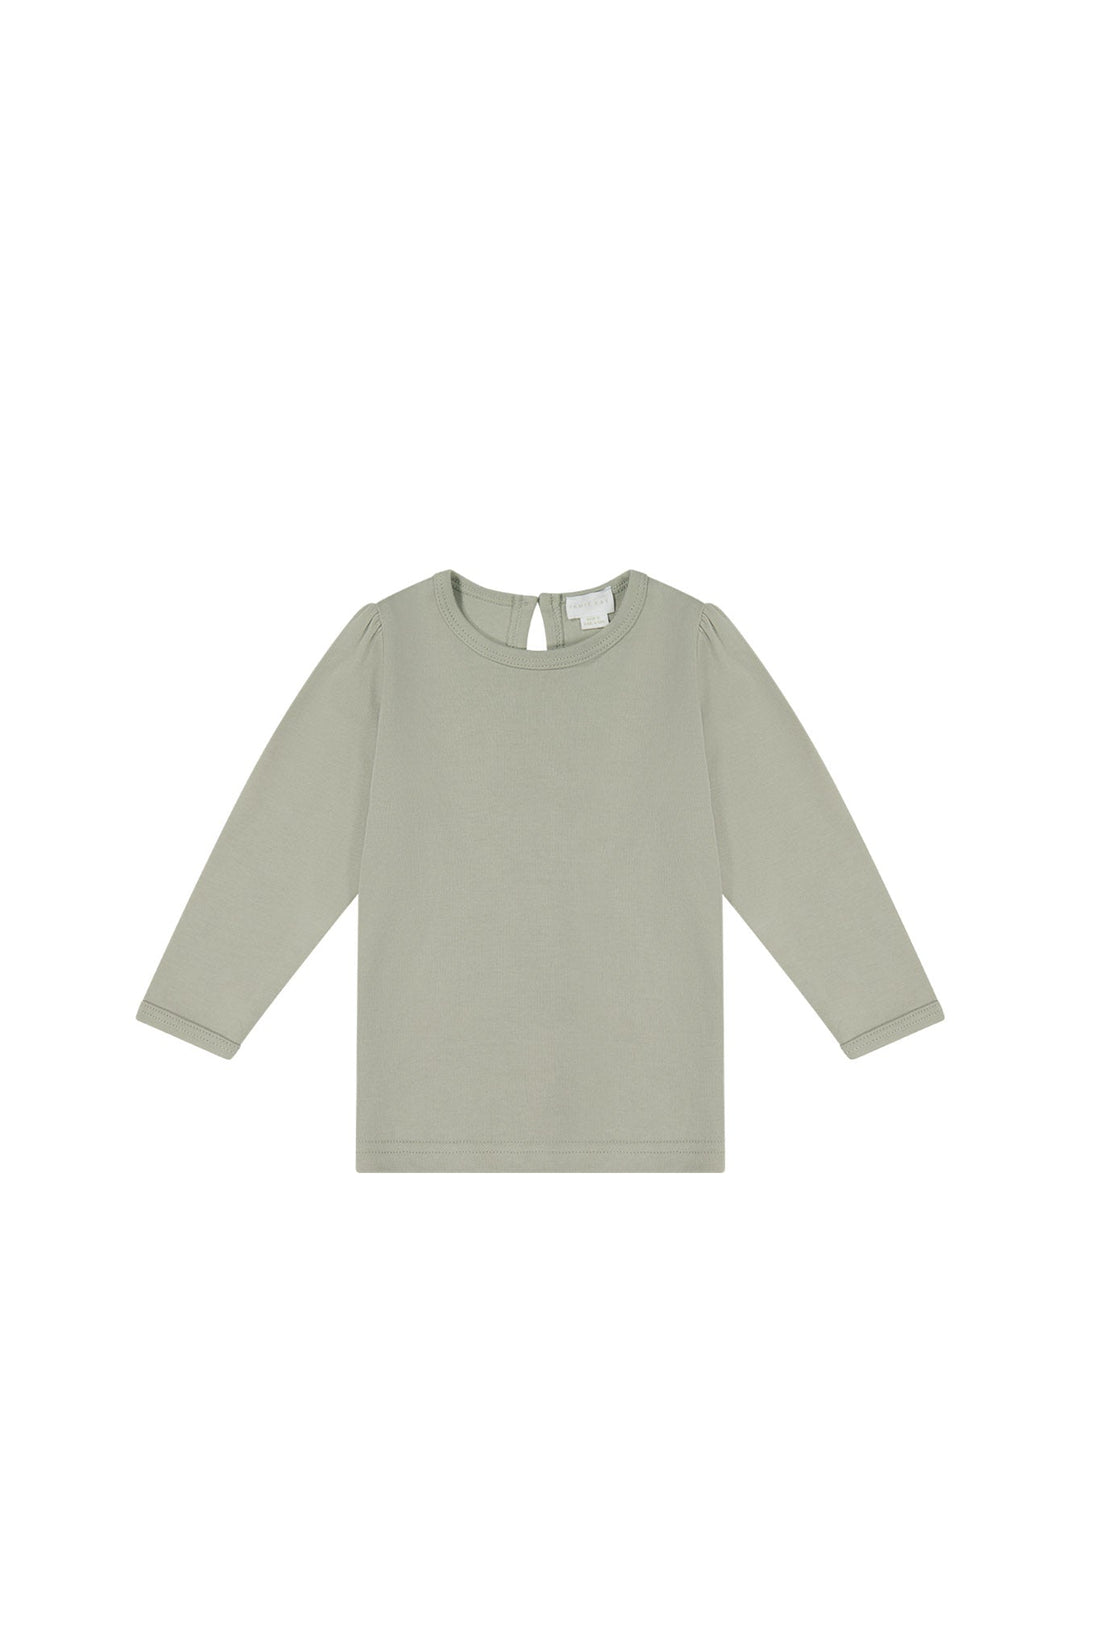 Pima Cotton Cindy Top - Sage Childrens Top from Jamie Kay USA